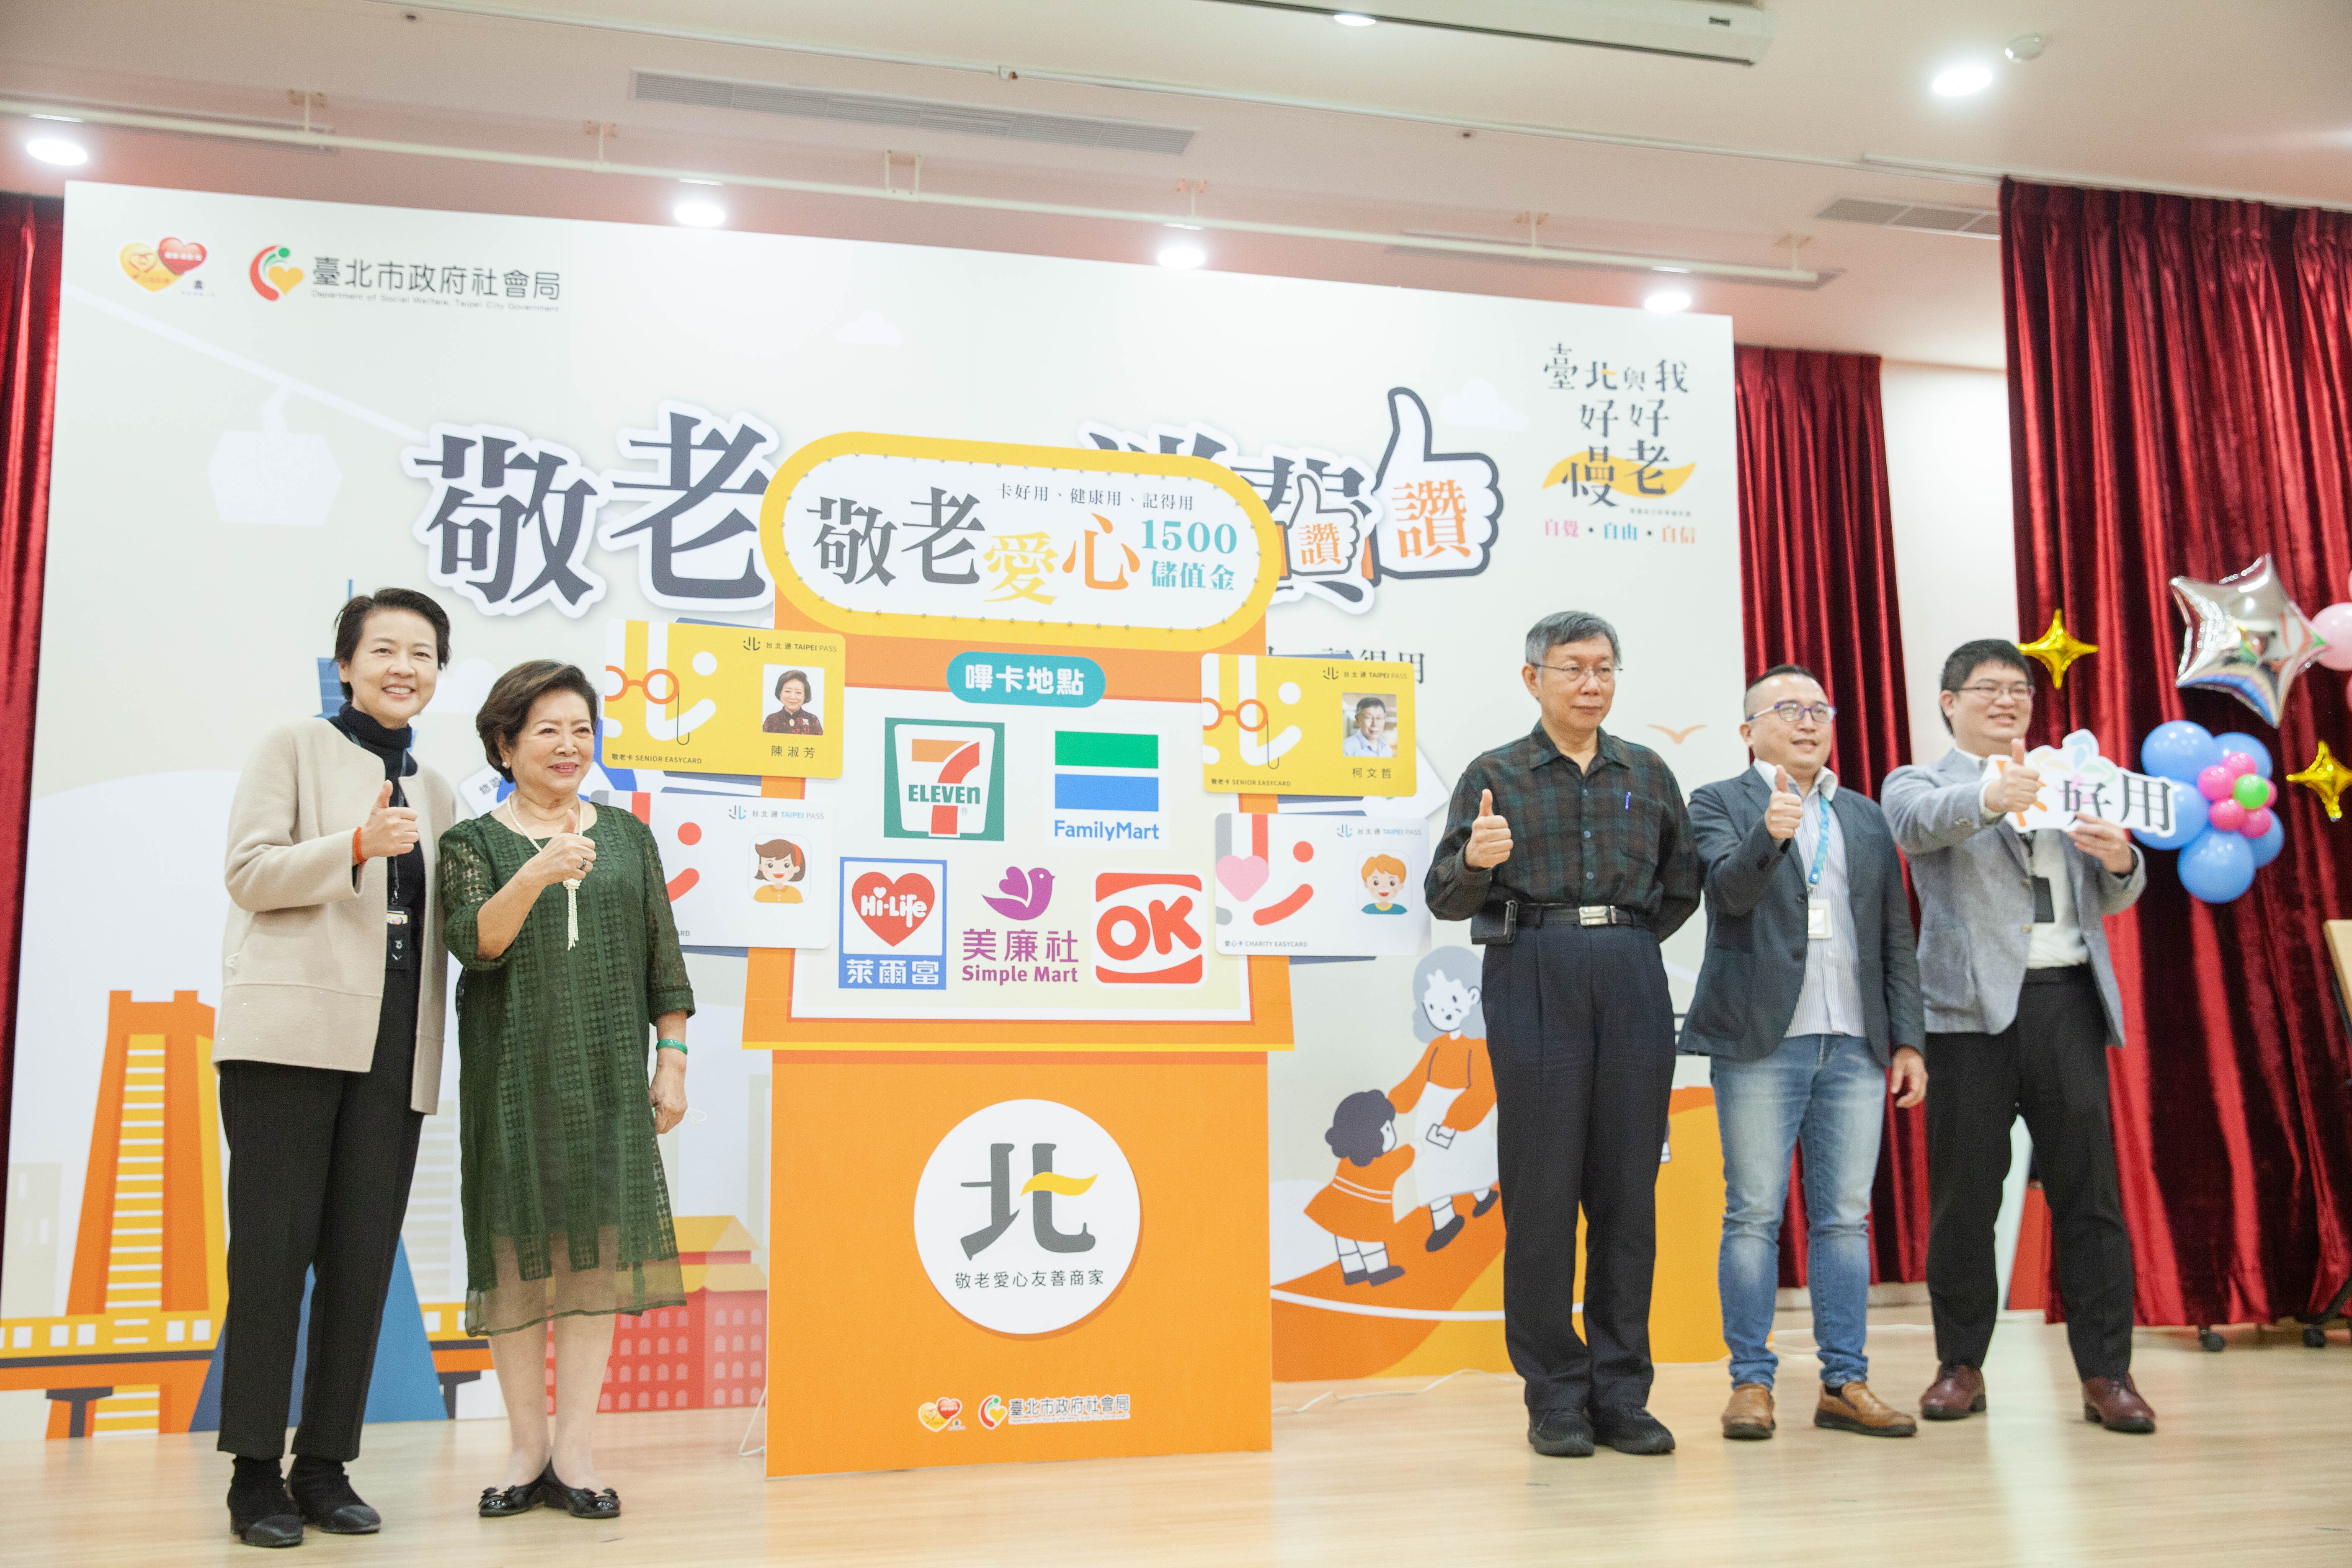 The NT$1500-worth of funds will be added to the senior’s EasyCard for free for the concessionaire card owners. (Photo / Provided by the Taipei City Government)